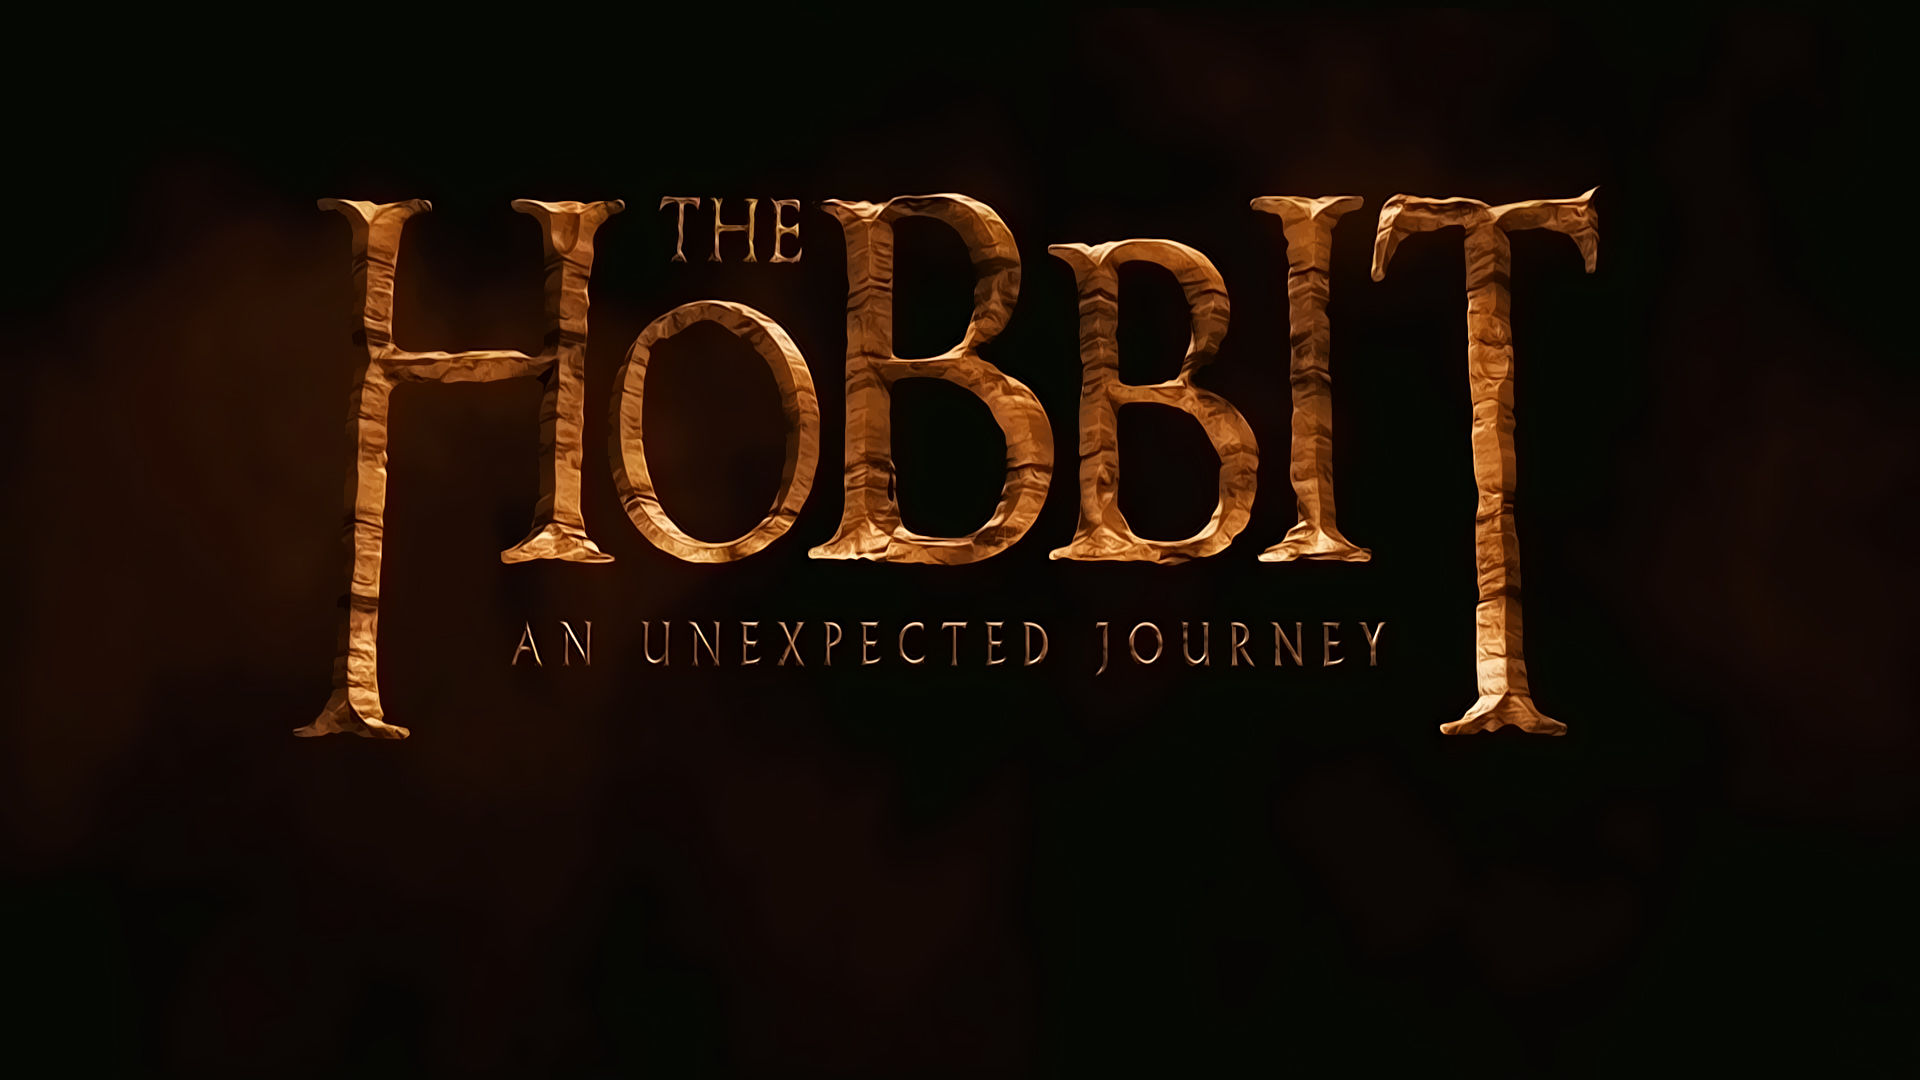 General 1920x1080 The Hobbit: An Unexpected Journey movies 2012 (Year) The Hobbit Peter Jackson